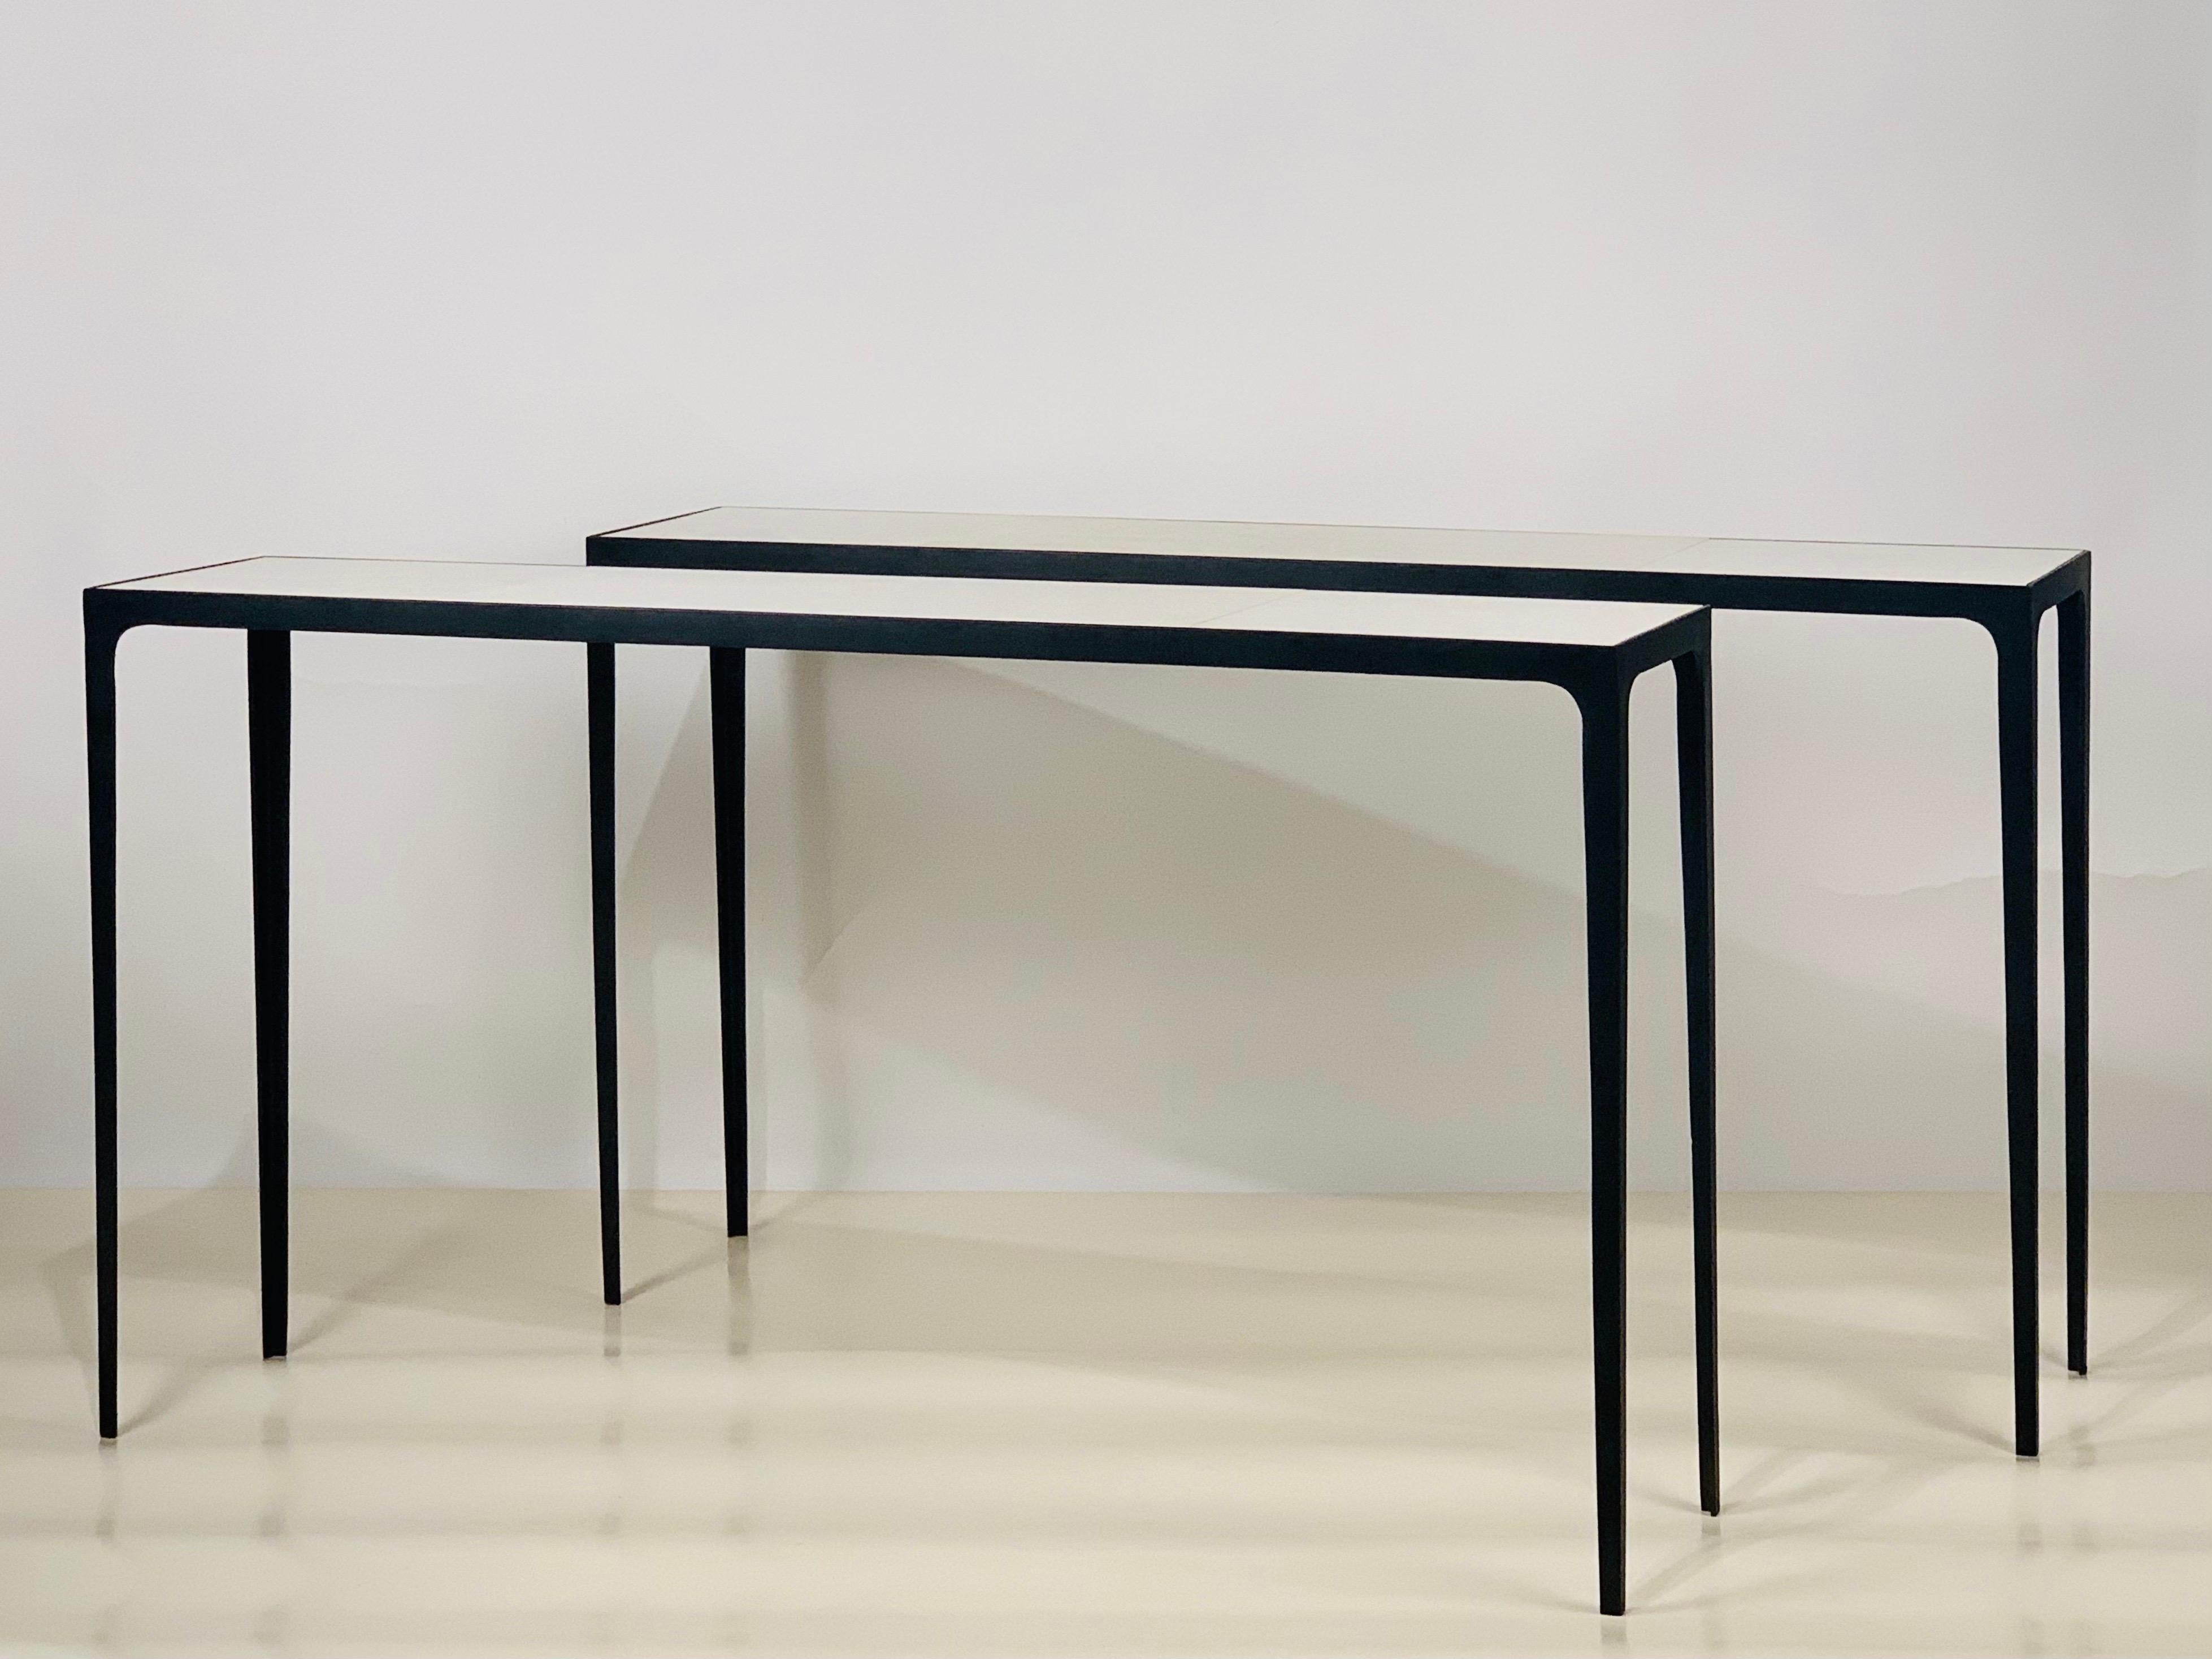 Pair of long 'Esquisse' blackened iron and parchment consoles from our exclusive Design Frères line.

Chic combination of slender blackened iron bases with inset goatskin (parchemin) clad tops.

Impressive proportions. Understated elegance.